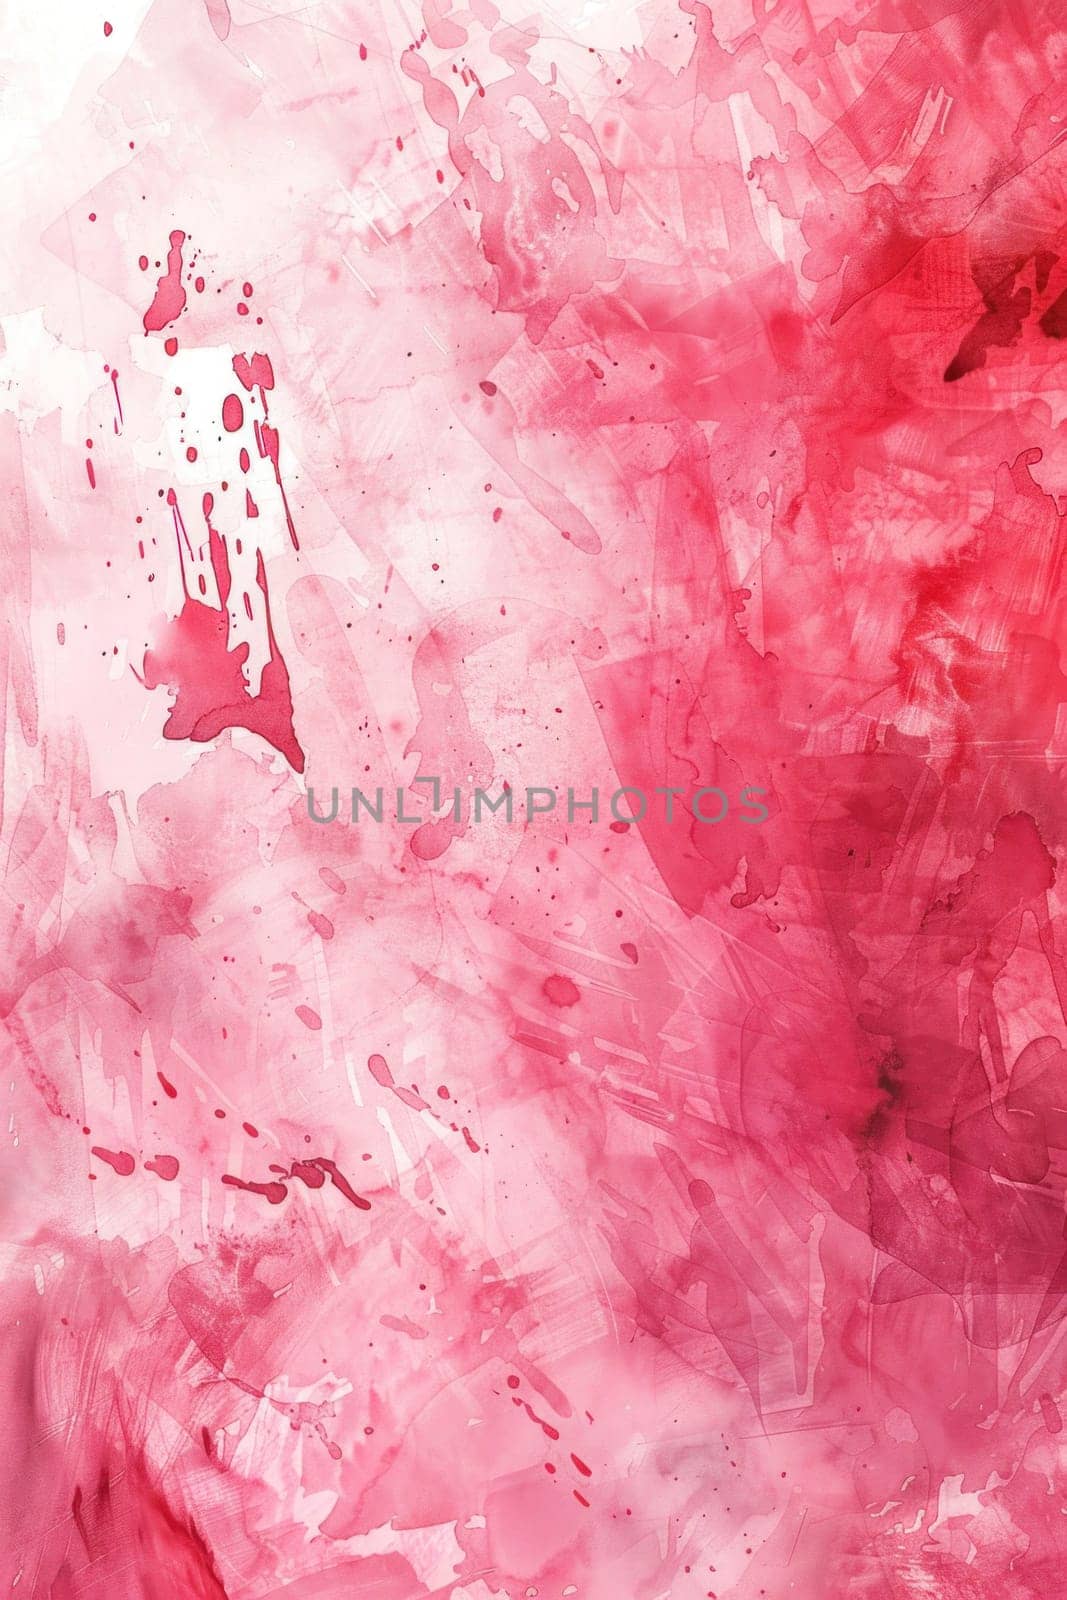 Abstract pink watercolor paint splatters on white background with a red accent artistic beauty in contrast and color palette